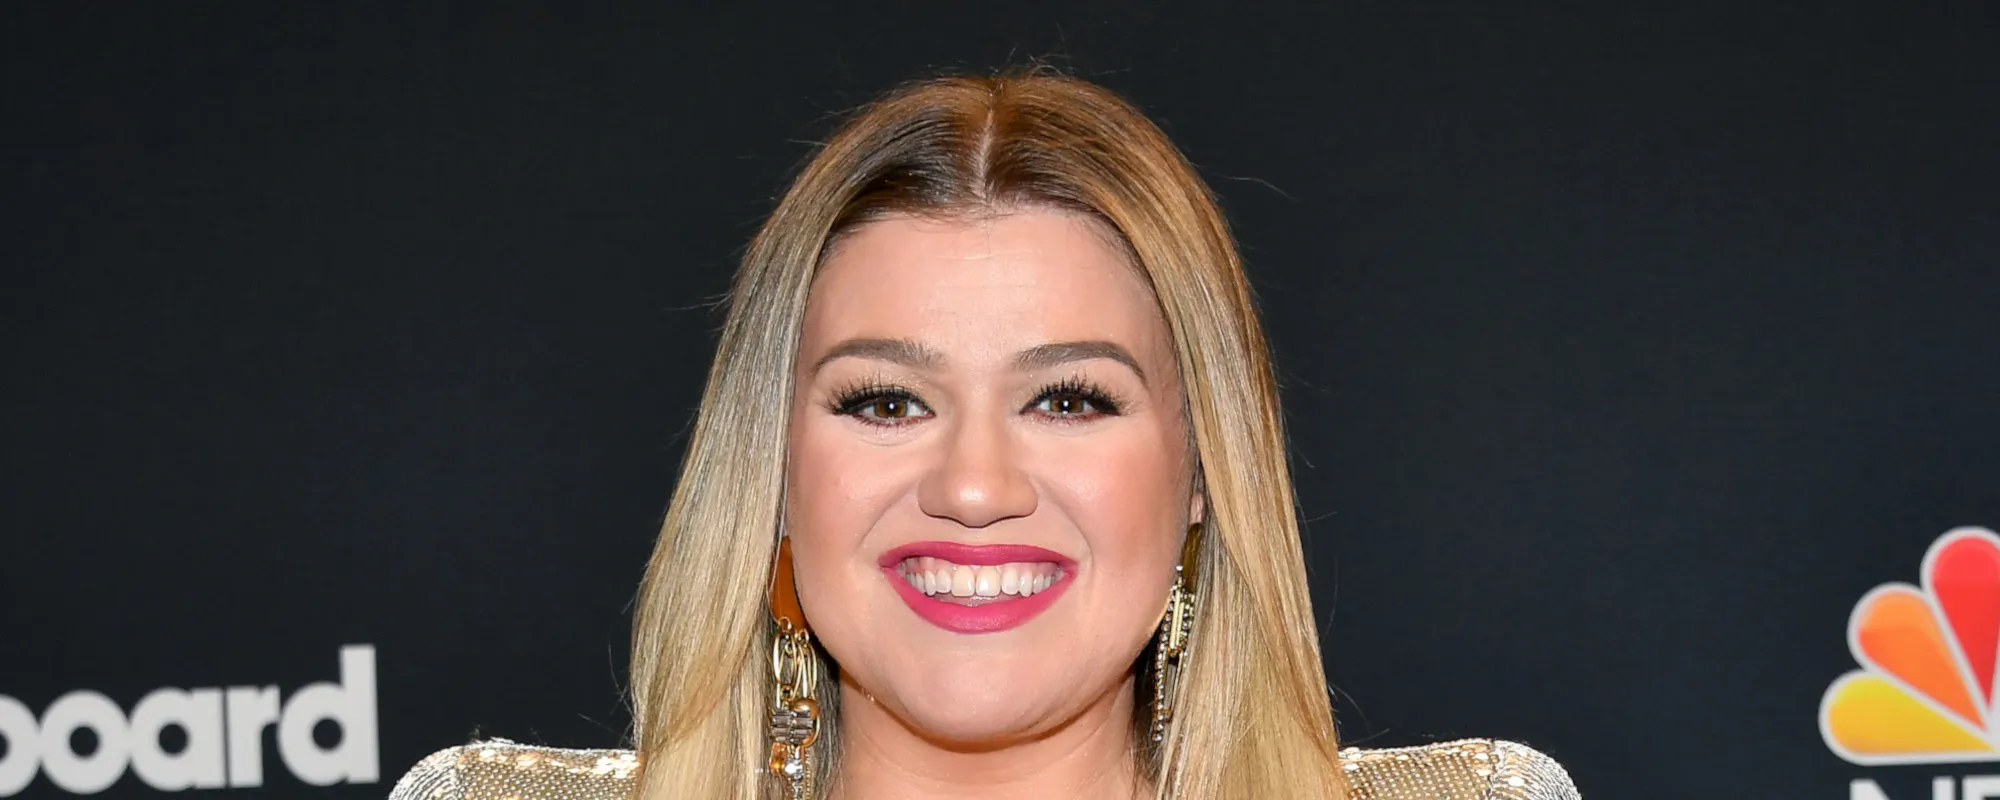 Kelly Clarkson Chats with Selena Gomez, Covers “Monster Mash” in Busy ‘Kelly Clarkson Show’ Week